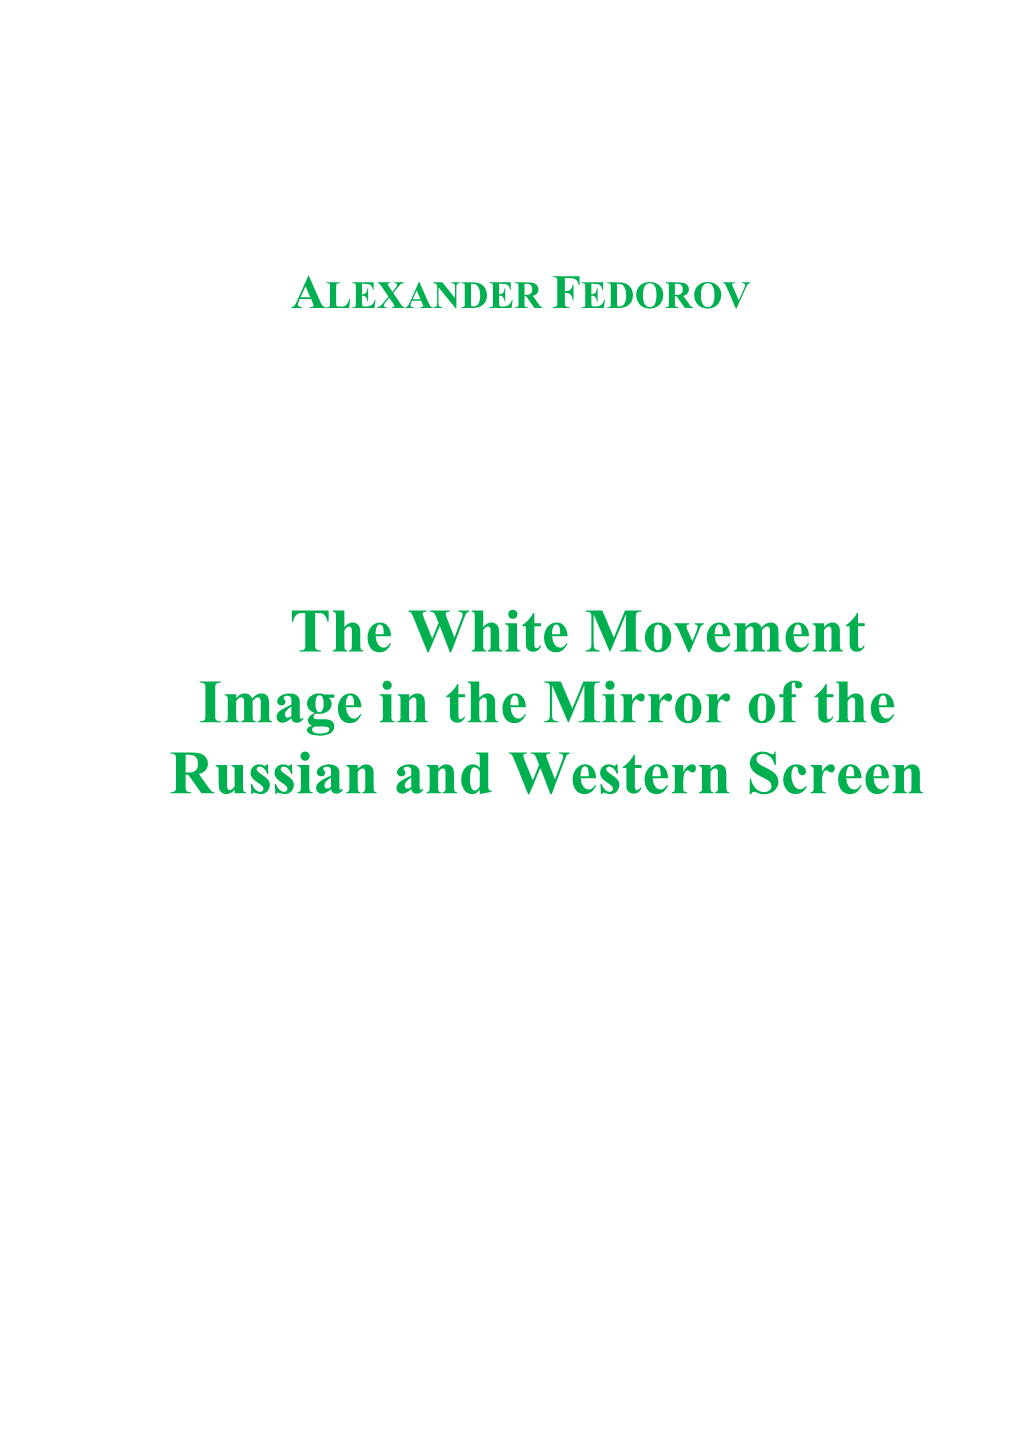 White Movement Played an Important Role in the Russian History of the XX Century